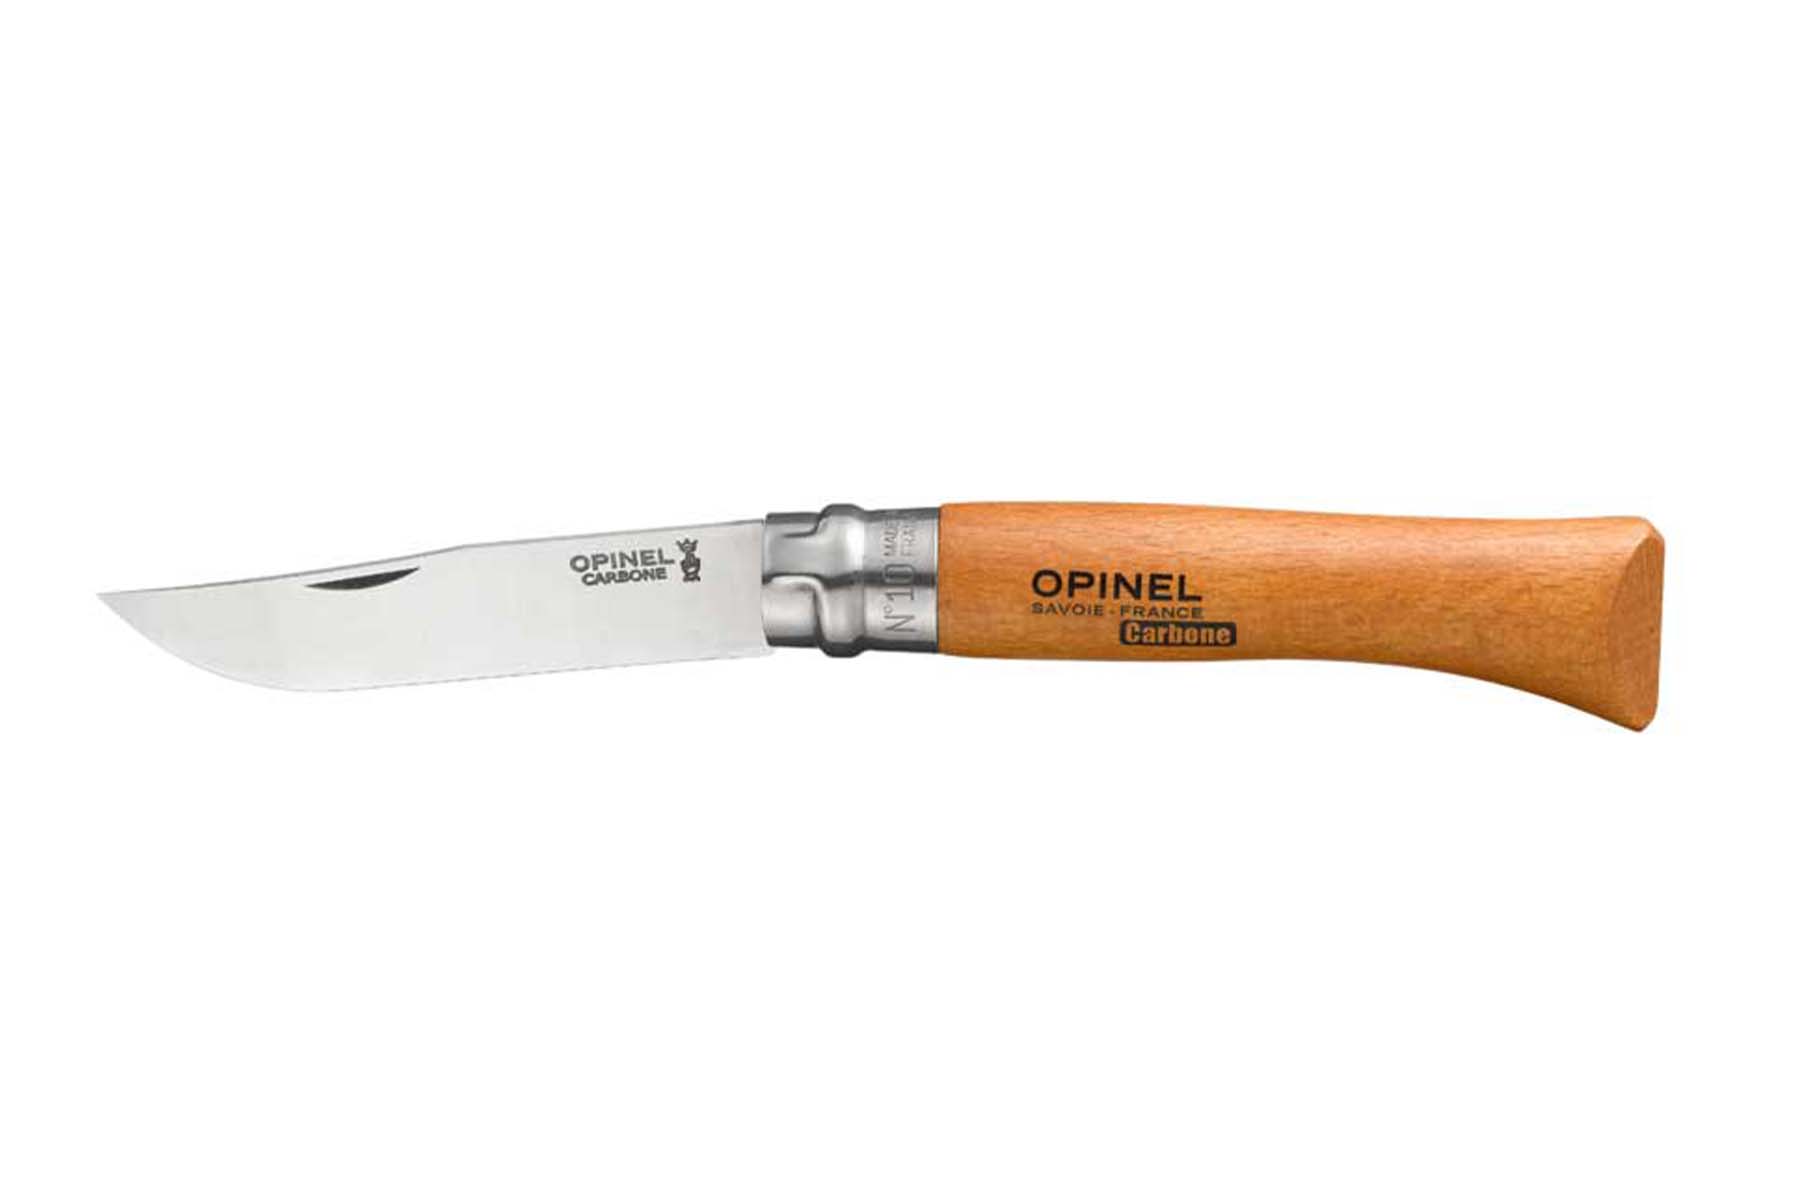 Couteau Opinel n°10 lame carbone